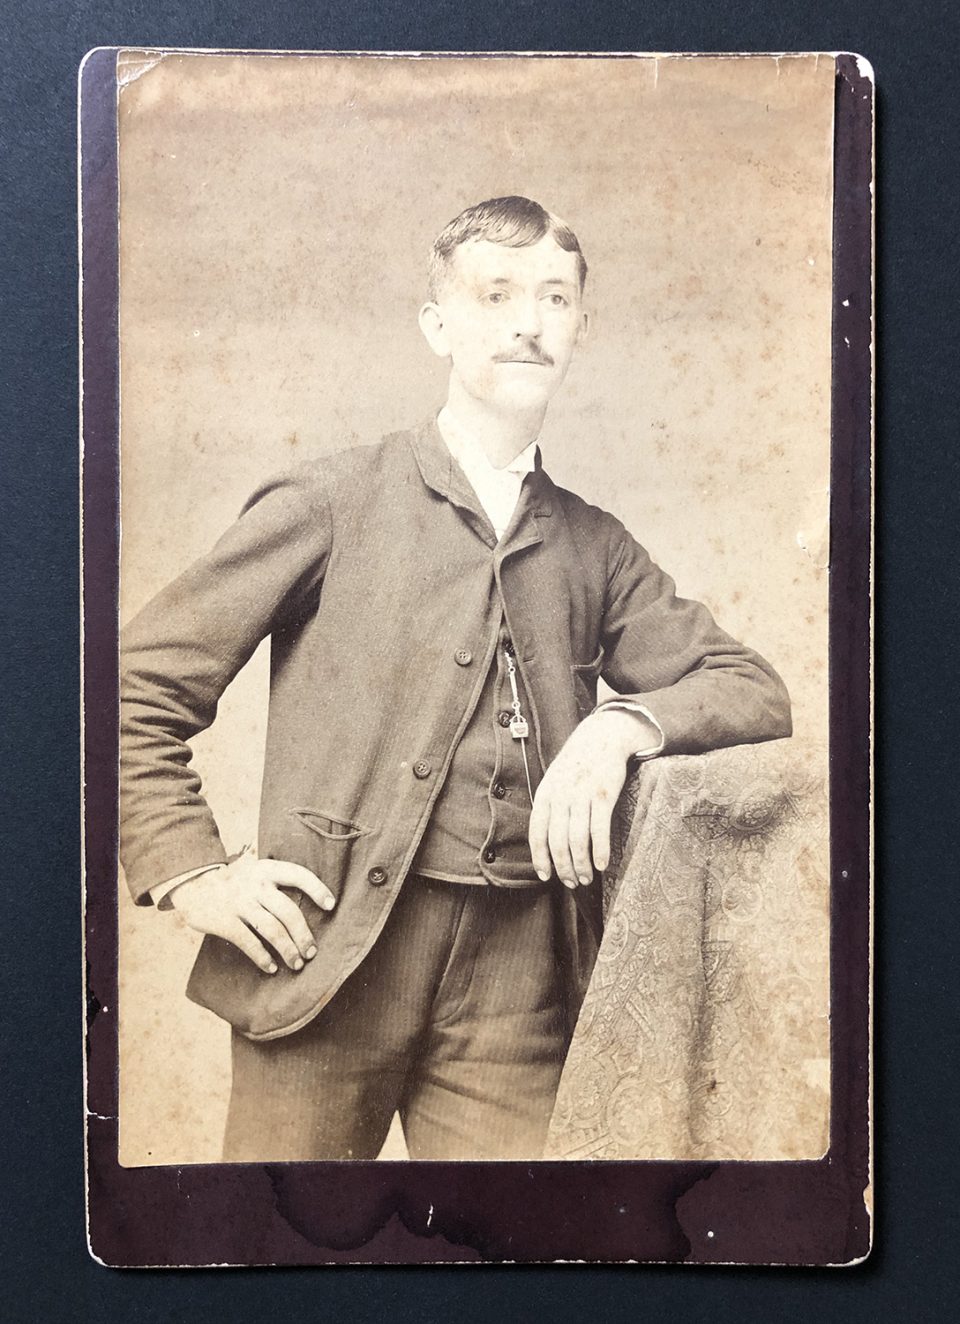 Cabinet Card portrait of an unidentified subject, made in the 1880s by photographer W.S. "Dad" Lively, founder of the Southern School of Photography in McMinnville, Tennessee